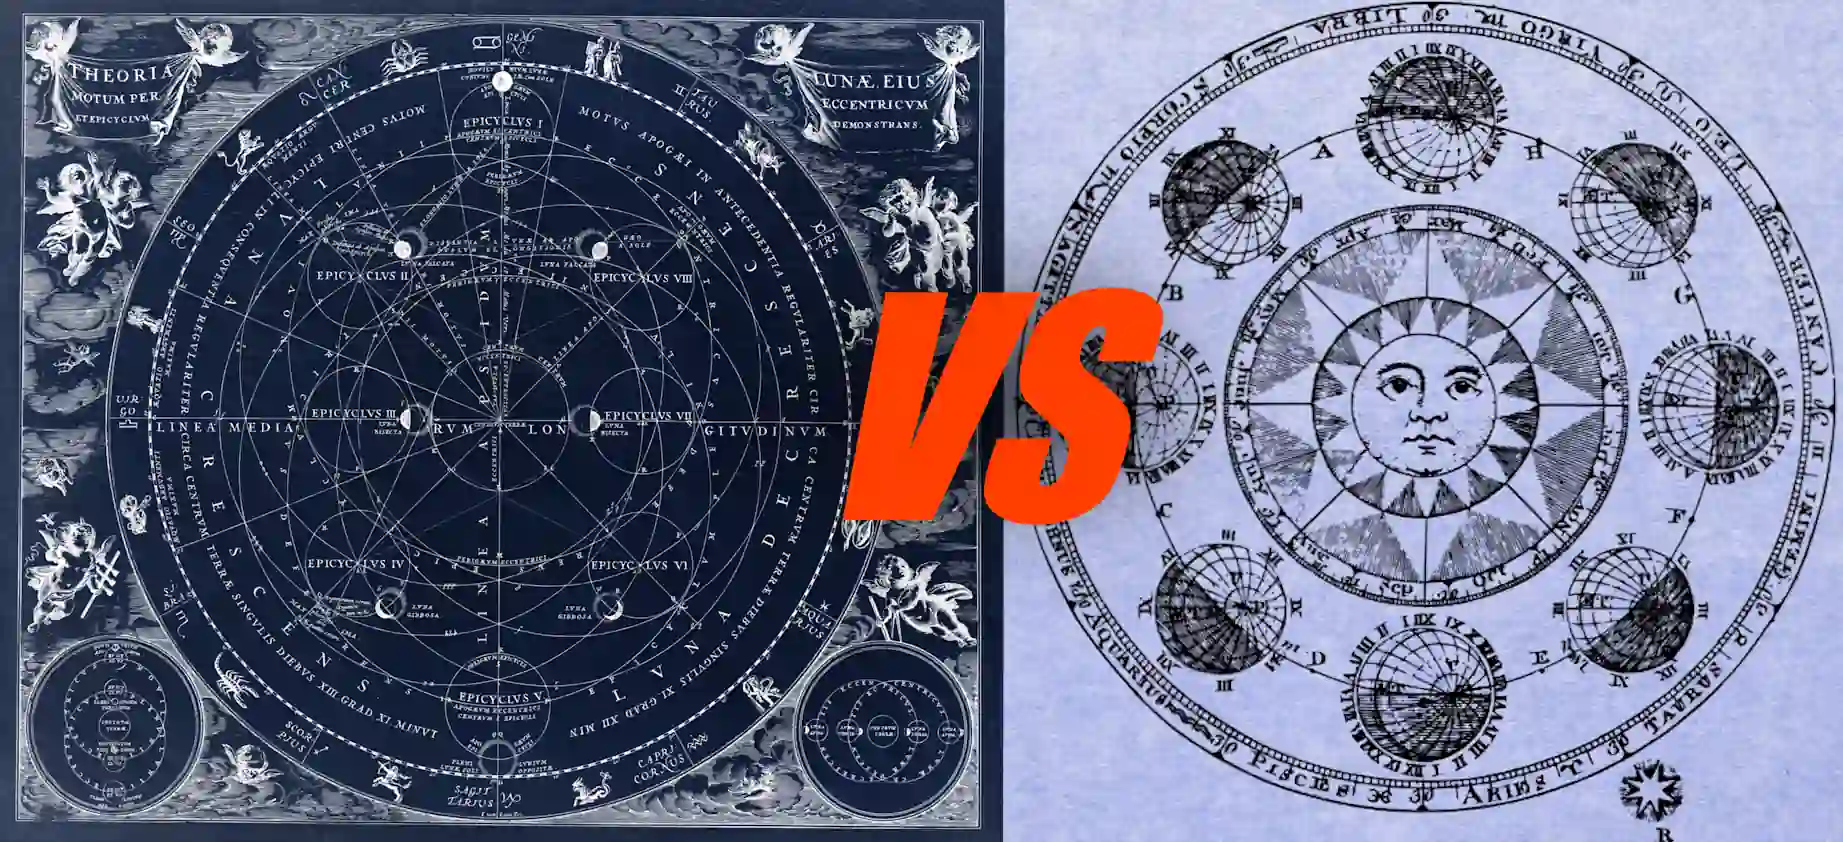 Astrology vs Astronomy: Unraveling Some Cosmic Confusion